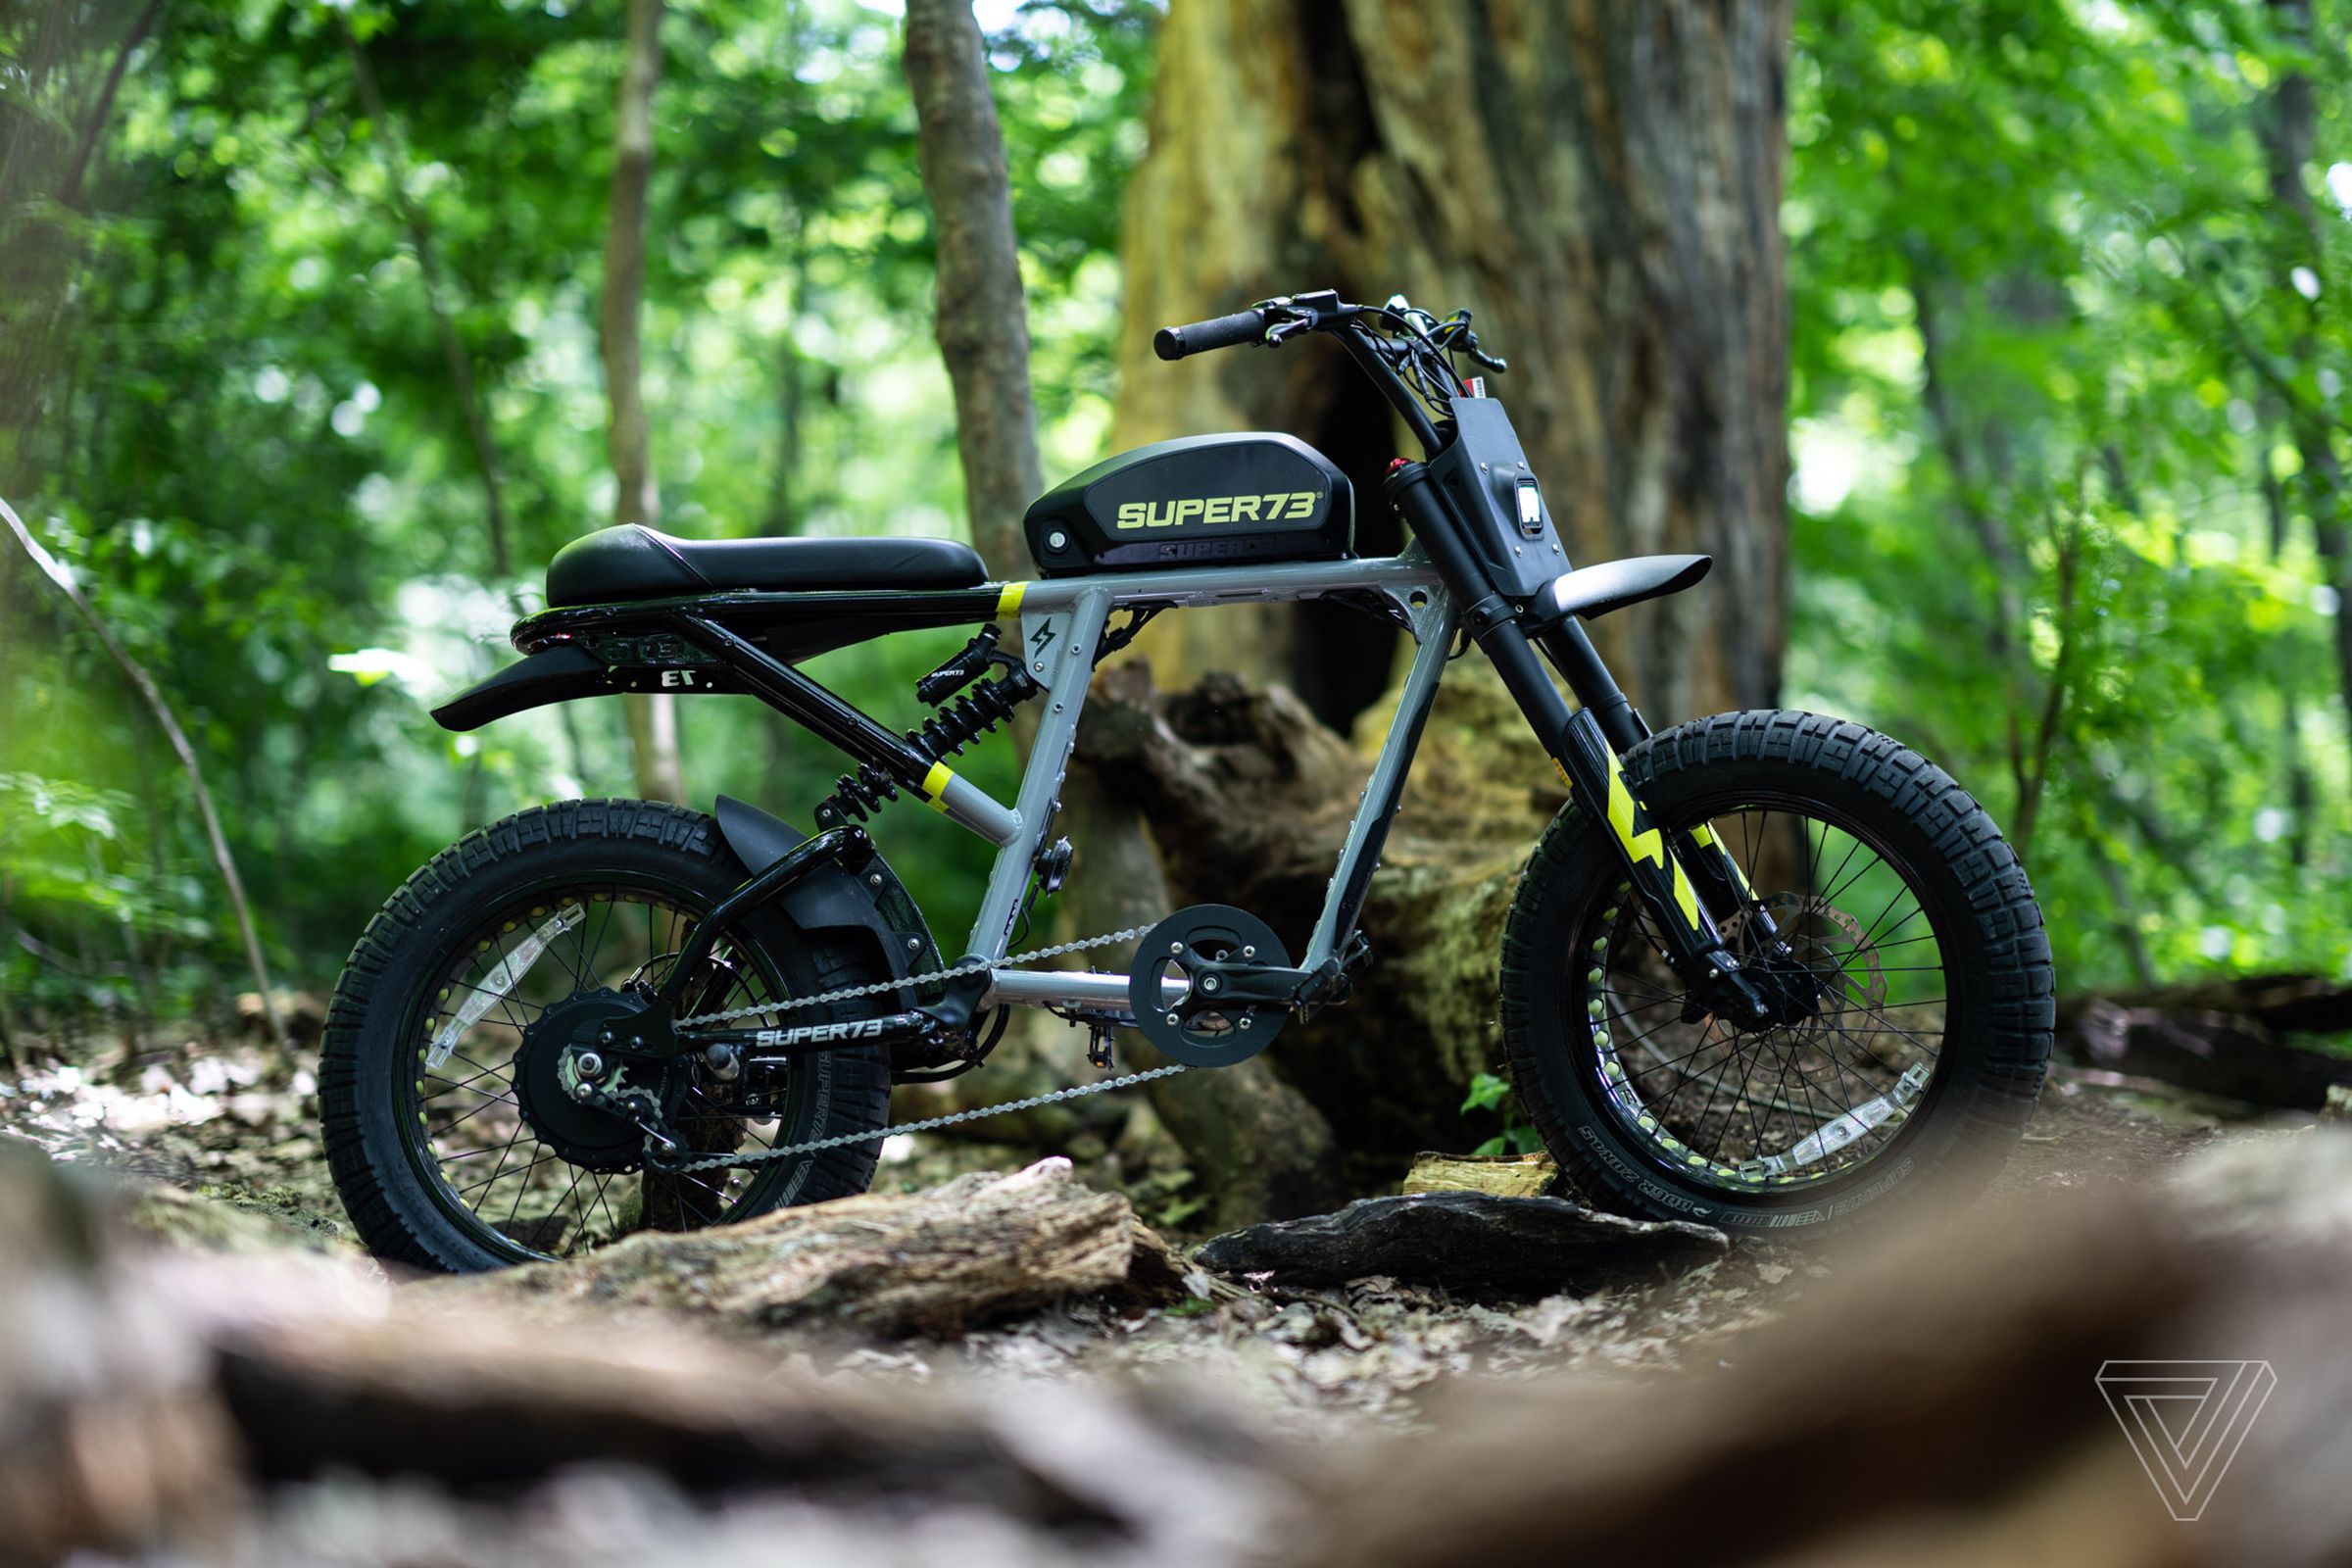 Super73’s latest bike, the $3500 RX, looks and rides more like a dirt bike than a bicycle.